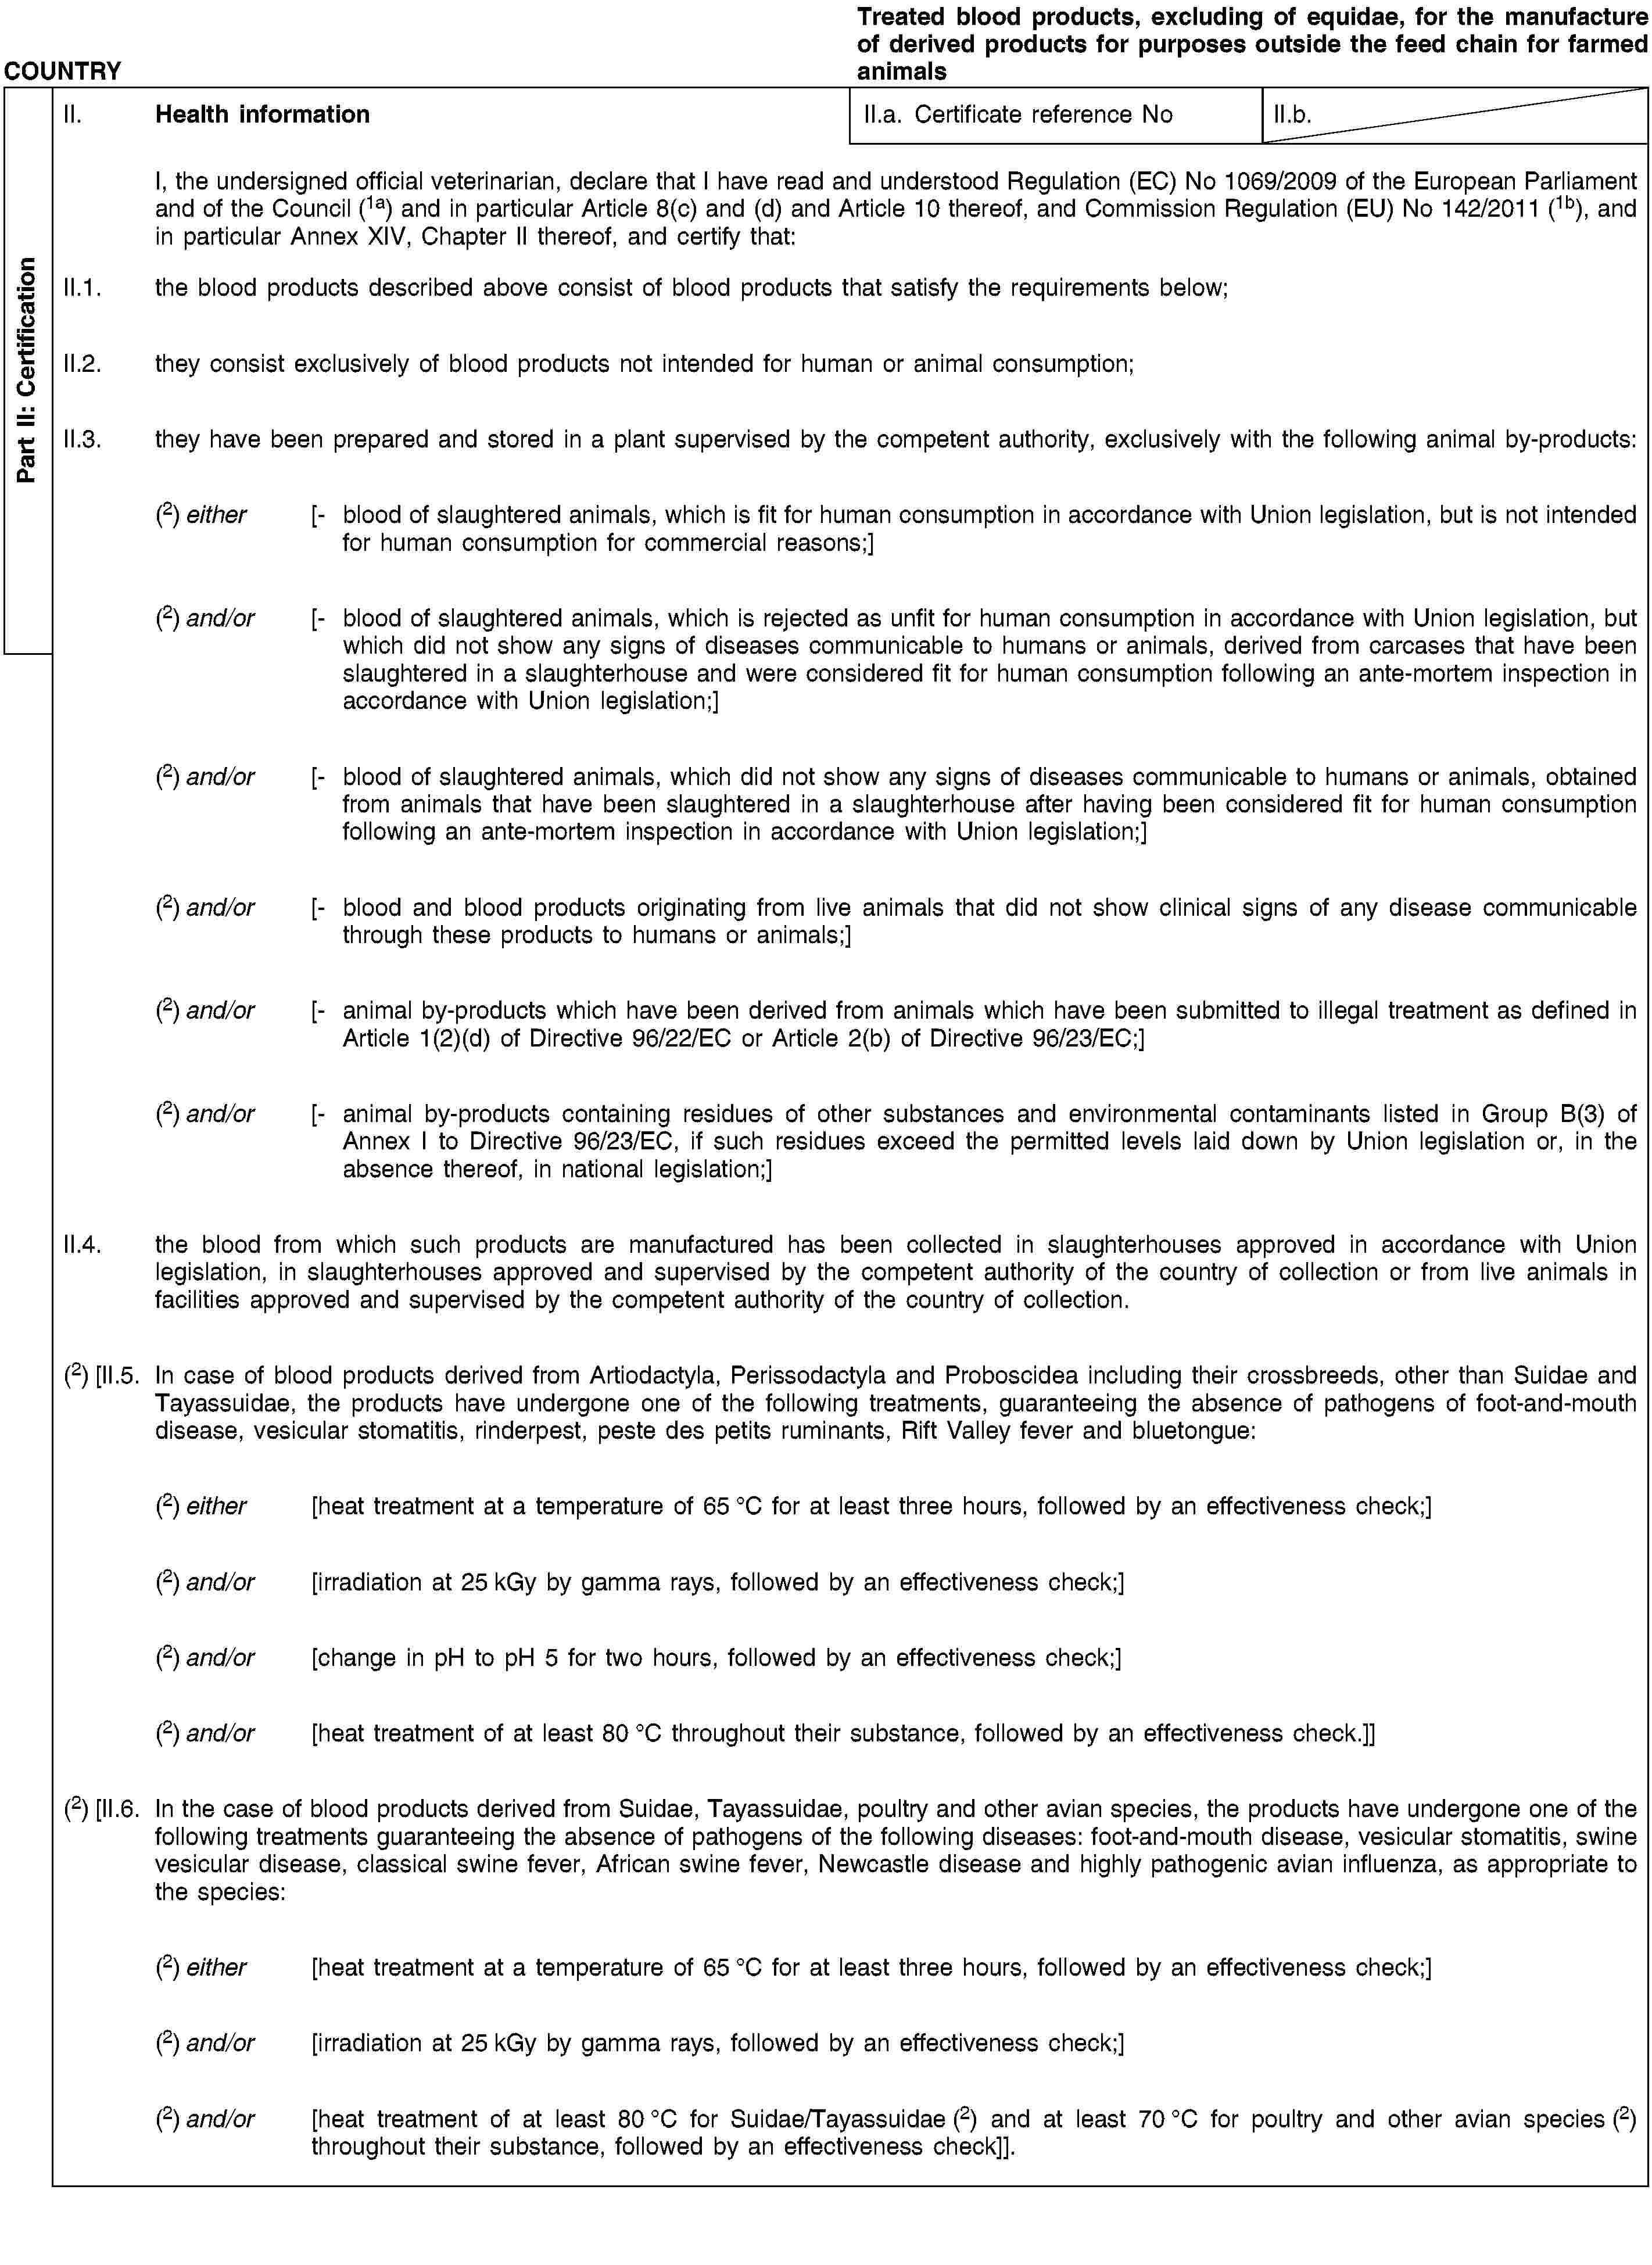 Part II: CertificationCOUNTRYTreated blood products, excluding of equidae, for the manufacture of derived products for purposes outside the feed chain for farmed animalsII. Health informationII.a. Certificate reference NoII.b.I, the undersigned official veterinarian, declare that I have read and understood Regulation (EC) No 1069/2009 of the European Parliament and of the Council (1a) and in particular Article 8(c) and (d) and Article 10 thereof, and Commission Regulation (EU) No 142/2011 (1b), and in particular Annex XIV, Chapter II thereof, and certify that:II.1. the blood products described above consist of blood products that satisfy the requirements below;II.2. they consist exclusively of blood products not intended for human or animal consumption;II.3. they have been prepared and stored in a plant supervised by the competent authority, exclusively with the following animal by-products:(2) either [- blood of slaughtered animals, which is fit for human consumption in accordance with Union legislation, but is not intended for human consumption for commercial reasons;](2) and/or [- blood of slaughtered animals, which is rejected as unfit for human consumption in accordance with Union legislation, but which did not show any signs of diseases communicable to humans or animals, derived from carcases that have been slaughtered in a slaughterhouse and were considered fit for human consumption following an ante-mortem inspection in accordance with Union legislation;](2) and/or [- blood of slaughtered animals, which did not show any signs of diseases communicable to humans or animals, obtained from animals that have been slaughtered in a slaughterhouse after having been considered fit for human consumption following an ante-mortem inspection in accordance with Union legislation;](2) and/or [- blood and blood products originating from live animals that did not show clinical signs of any disease communicable through these products to humans or animals;](2) and/or [- animal by-products which have been derived from animals which have been submitted to illegal treatment as defined in Article 1(2)(d) of Directive 96/22/EC or Article 2(b) of Directive 96/23/EC;](2) and/or [- animal by-products containing residues of other substances and environmental contaminants listed in Group B(3) of Annex I to Directive 96/23/EC, if such residues exceed the permitted levels laid down by Union legislation or, in the absence thereof, in national legislation;]II.4. the blood from which such products are manufactured has been collected in slaughterhouses approved in accordance with Union legislation, in slaughterhouses approved and supervised by the competent authority of the country of collection or from live animals in facilities approved and supervised by the competent authority of the country of collection.(2) [II.5. In case of blood products derived from Artiodactyla, Perissodactyla and Proboscidea including their crossbreeds, other than Suidae and Tayassuidae, the products have undergone one of the following treatments, guaranteeing the absence of pathogens of foot-and-mouth disease, vesicular stomatitis, rinderpest, peste des petits ruminants, Rift Valley fever and bluetongue:(2) either [heat treatment at a temperature of 65 °C for at least three hours, followed by an effectiveness check;](2) and/or [irradiation at 25 kGy by gamma rays, followed by an effectiveness check;](2) and/or [change in pH to pH 5 for two hours, followed by an effectiveness check;](2) and/or [heat treatment of at least 80 °C throughout their substance, followed by an effectiveness check.]](2) [II.6. In the case of blood products derived from Suidae, Tayassuidae, poultry and other avian species, the products have undergone one of the following treatments guaranteeing the absence of pathogens of the following diseases: foot-and-mouth disease, vesicular stomatitis, swine vesicular disease, classical swine fever, African swine fever, Newcastle disease and highly pathogenic avian influenza, as appropriate to the species:(2) either [heat treatment at a temperature of 65 °C for at least three hours, followed by an effectiveness check;](2) and/or [irradiation at 25 kGy by gamma rays, followed by an effectiveness check;](2) and/or [heat treatment of at least 80 °C for Suidae/Tayassuidae (2) and at least 70 °C for poultry and other avian species (2) throughout their substance, followed by an effectiveness check]].